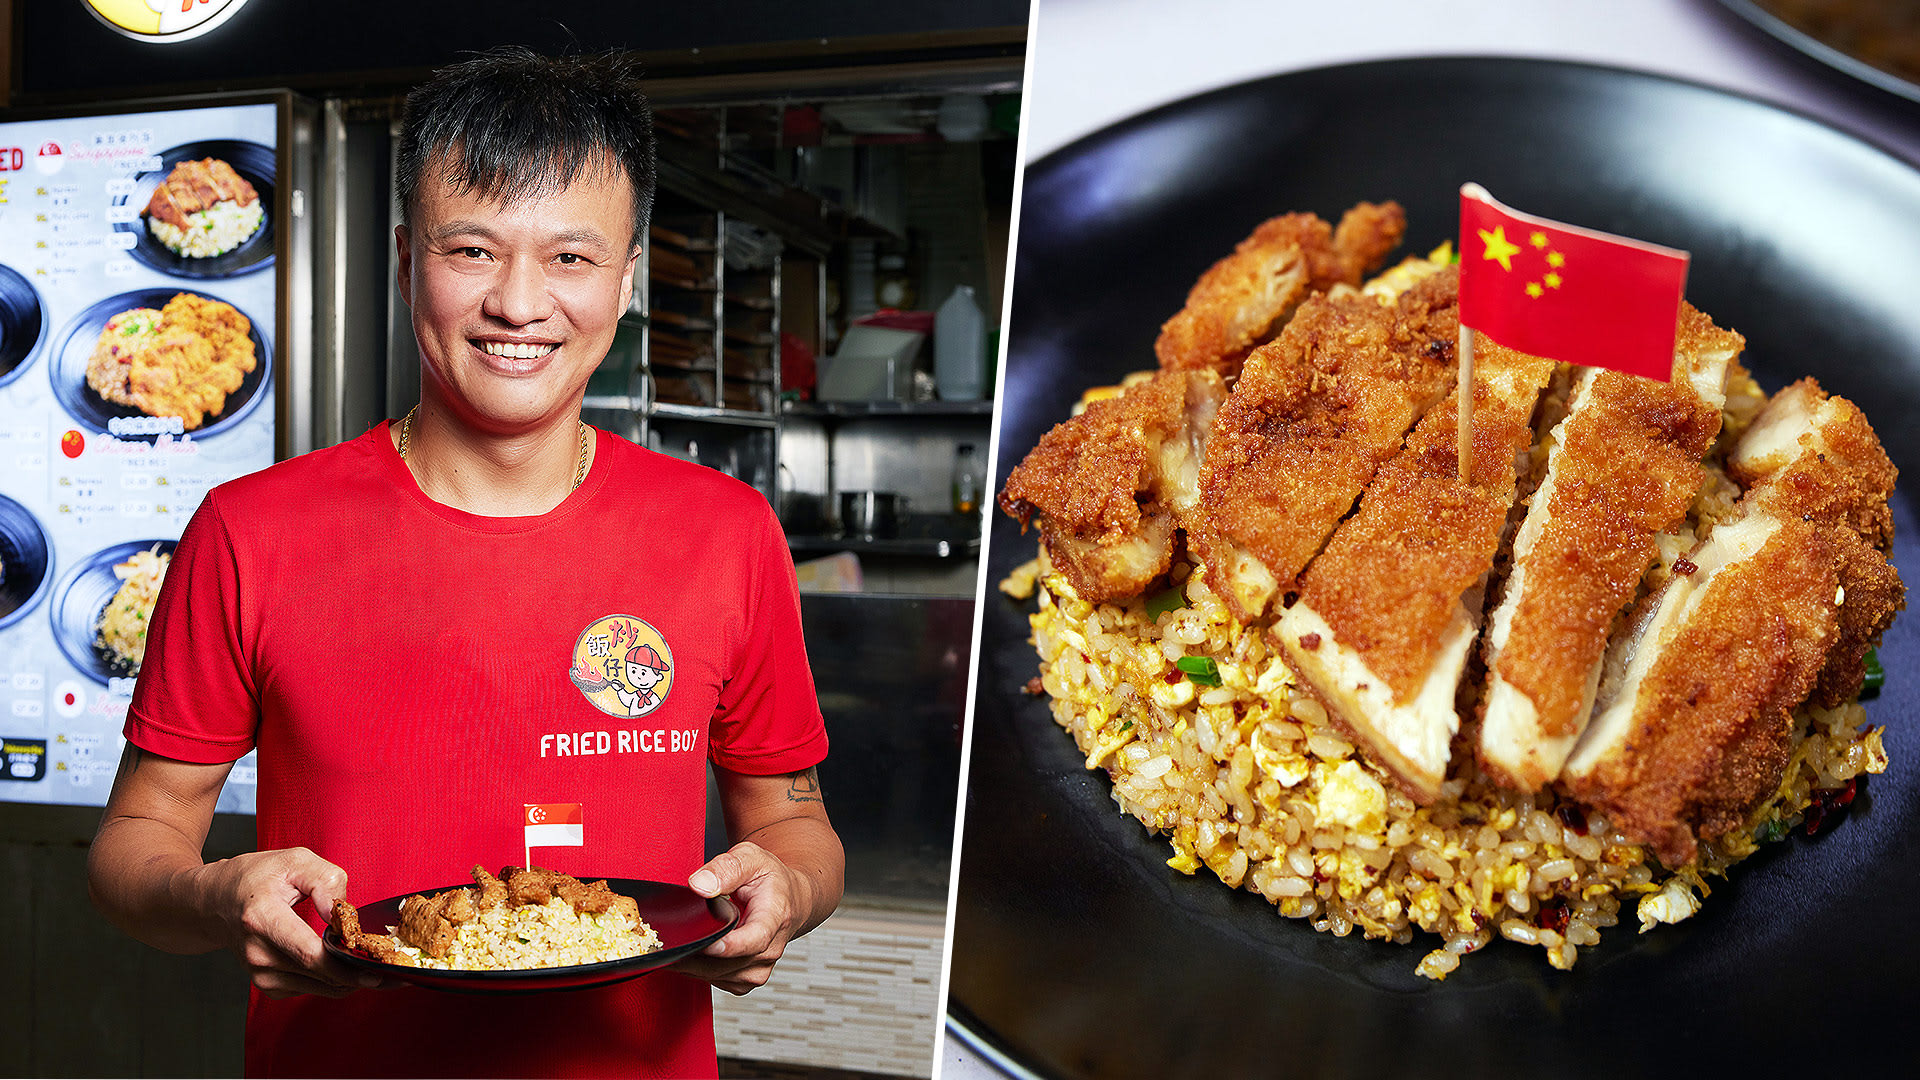 Fried Rice Boy is helmed by an ex-zi char stall cook who worked as a delivery man for 2 years to save up for his own biz.